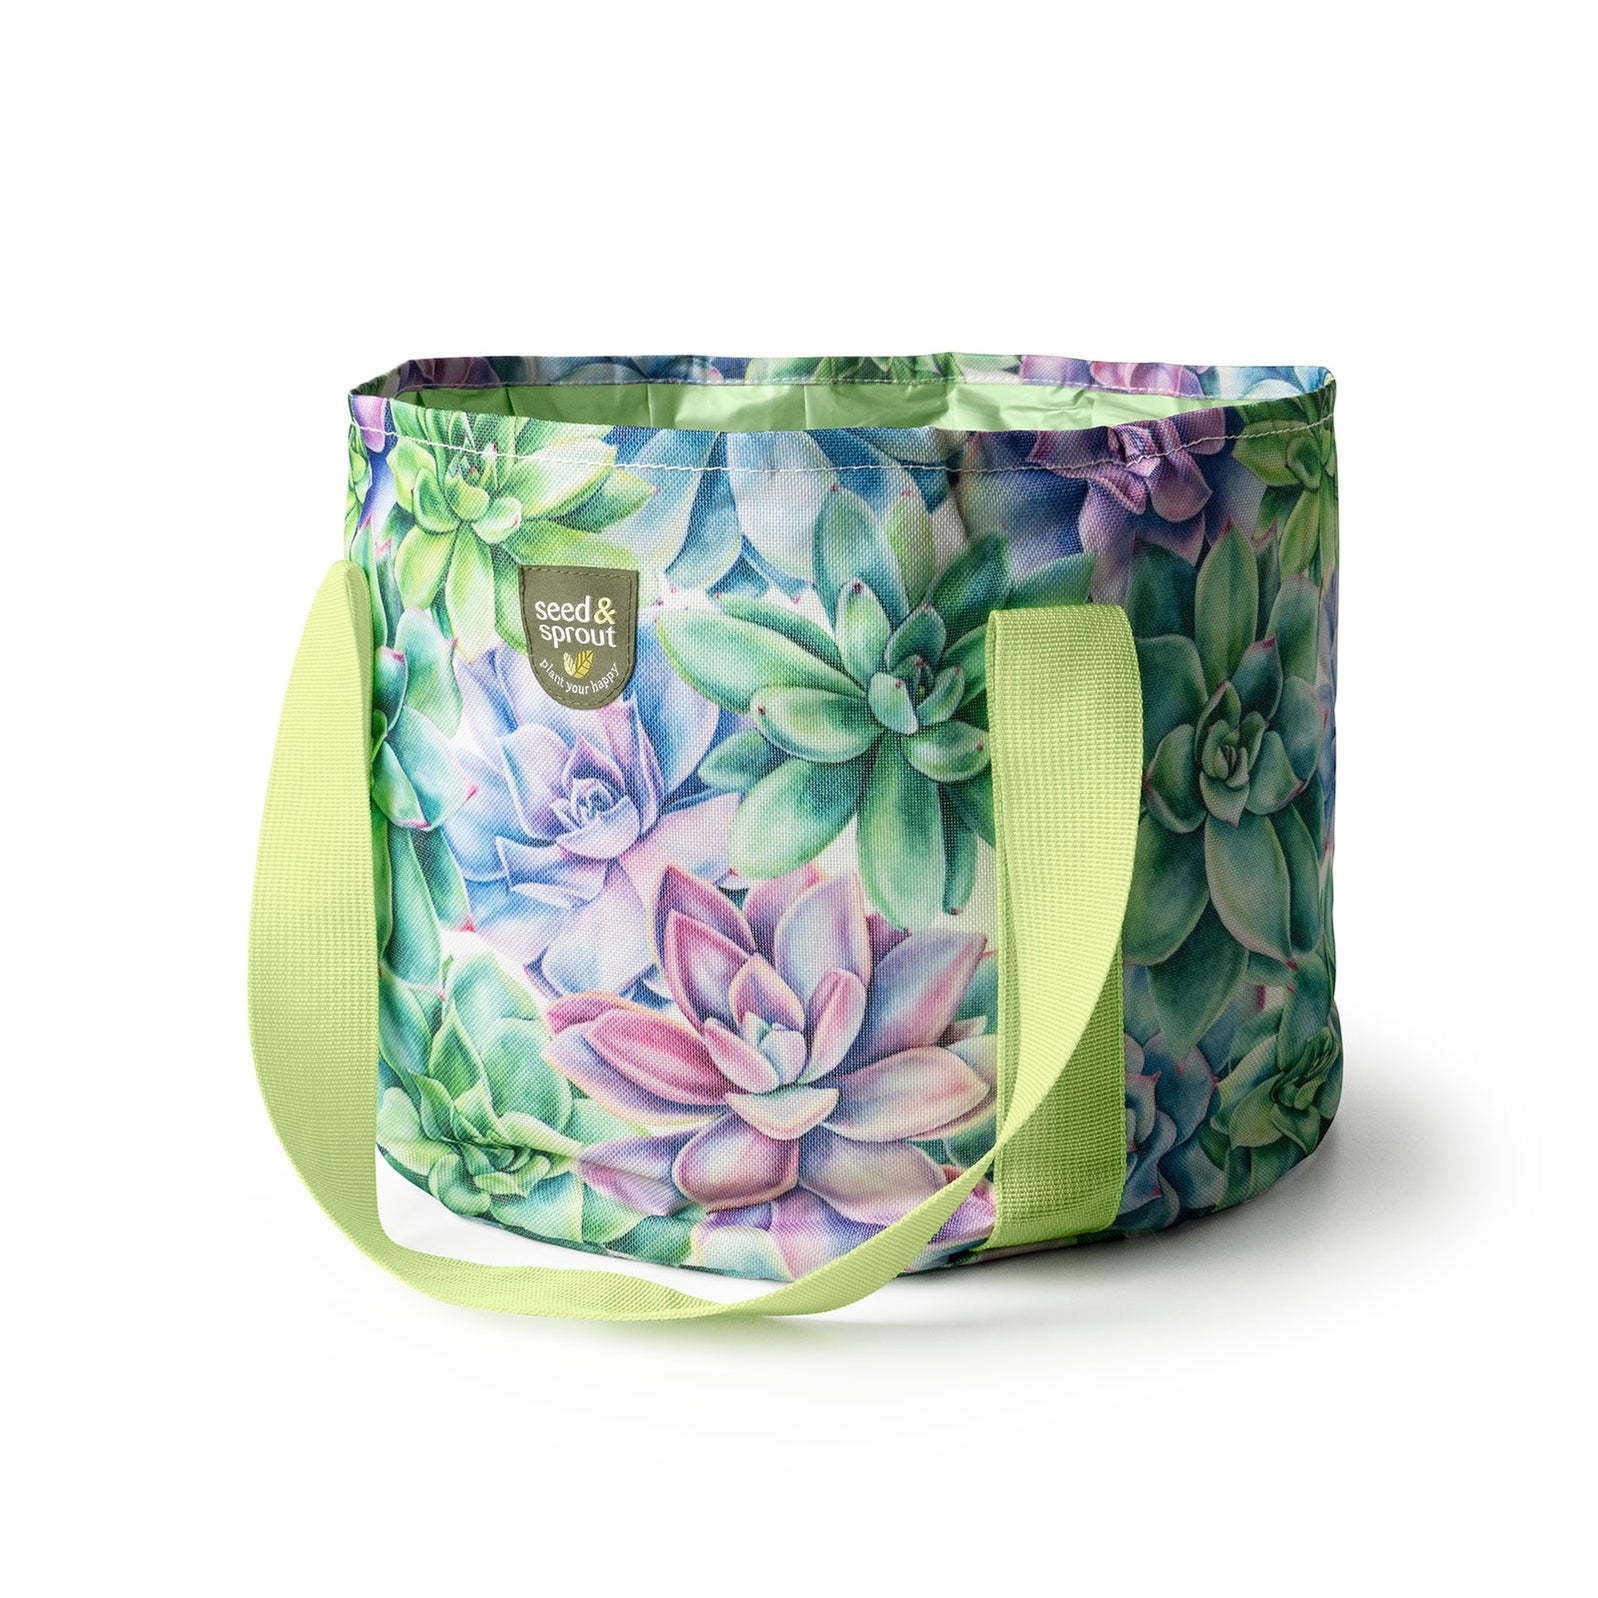 Seed & Sprout Foldable Gardening Bucket - FINAL SALE